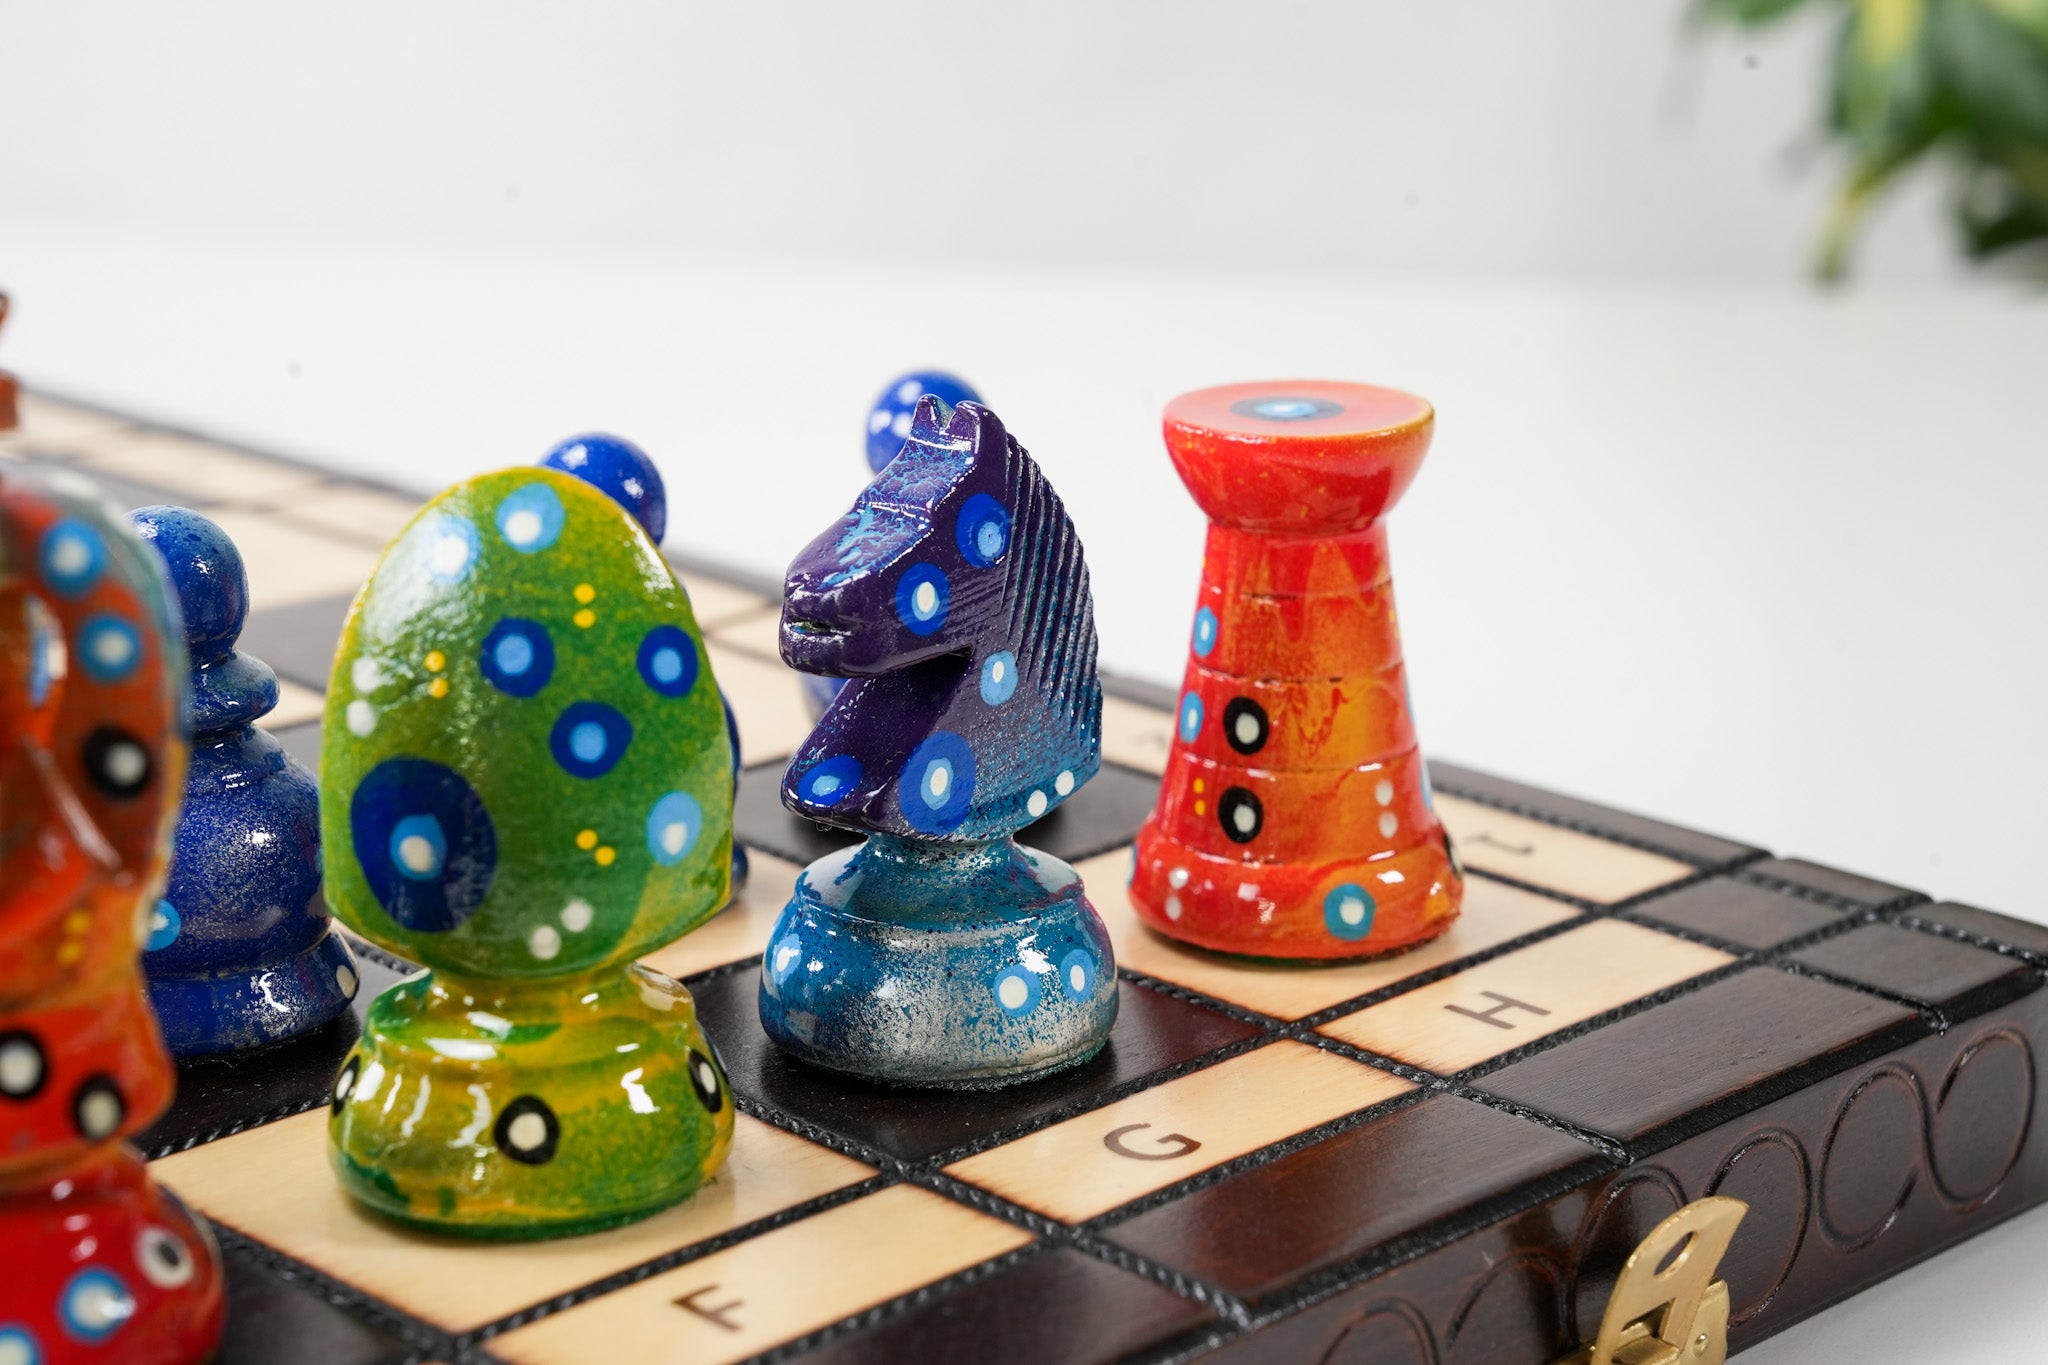 The Purist's Performance - Sydney Gruber Painted 17" Large Kings Chess Set #8 - Chess Set - Chess-House